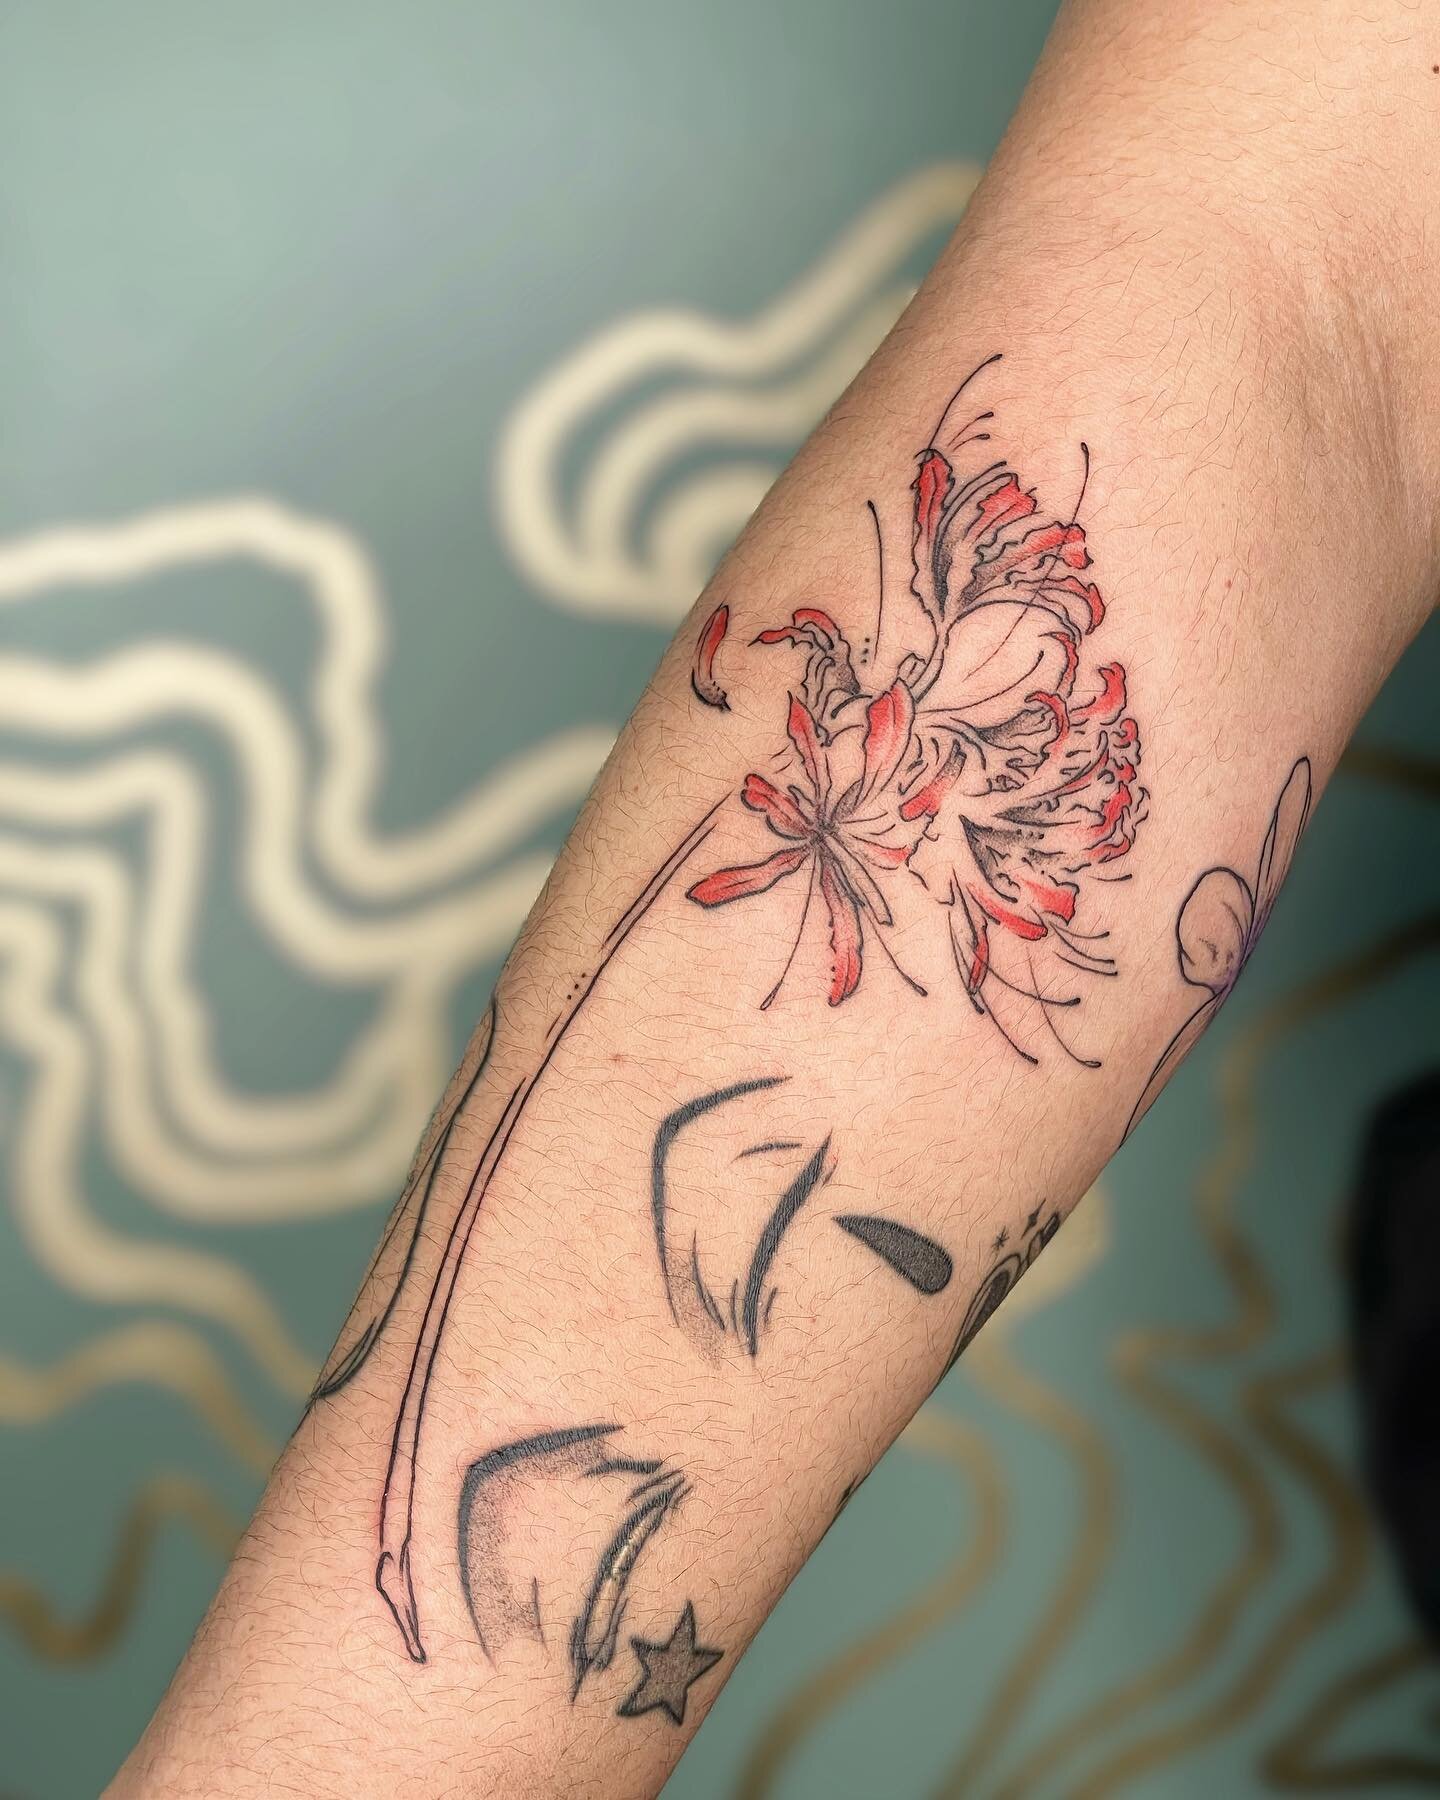 different kind of spider lilies and flowers for angelica 🤭 also next to some healed hisoka eyes (*ﾟ▽ﾟ*) (heart vials not by me)

done at @jadeanddaggertattoo
.
.
.
.
.
.
.
#tattoo #tattooartist #calgary #calgarytattoo #calgarytattooartist #yyc #yvr 